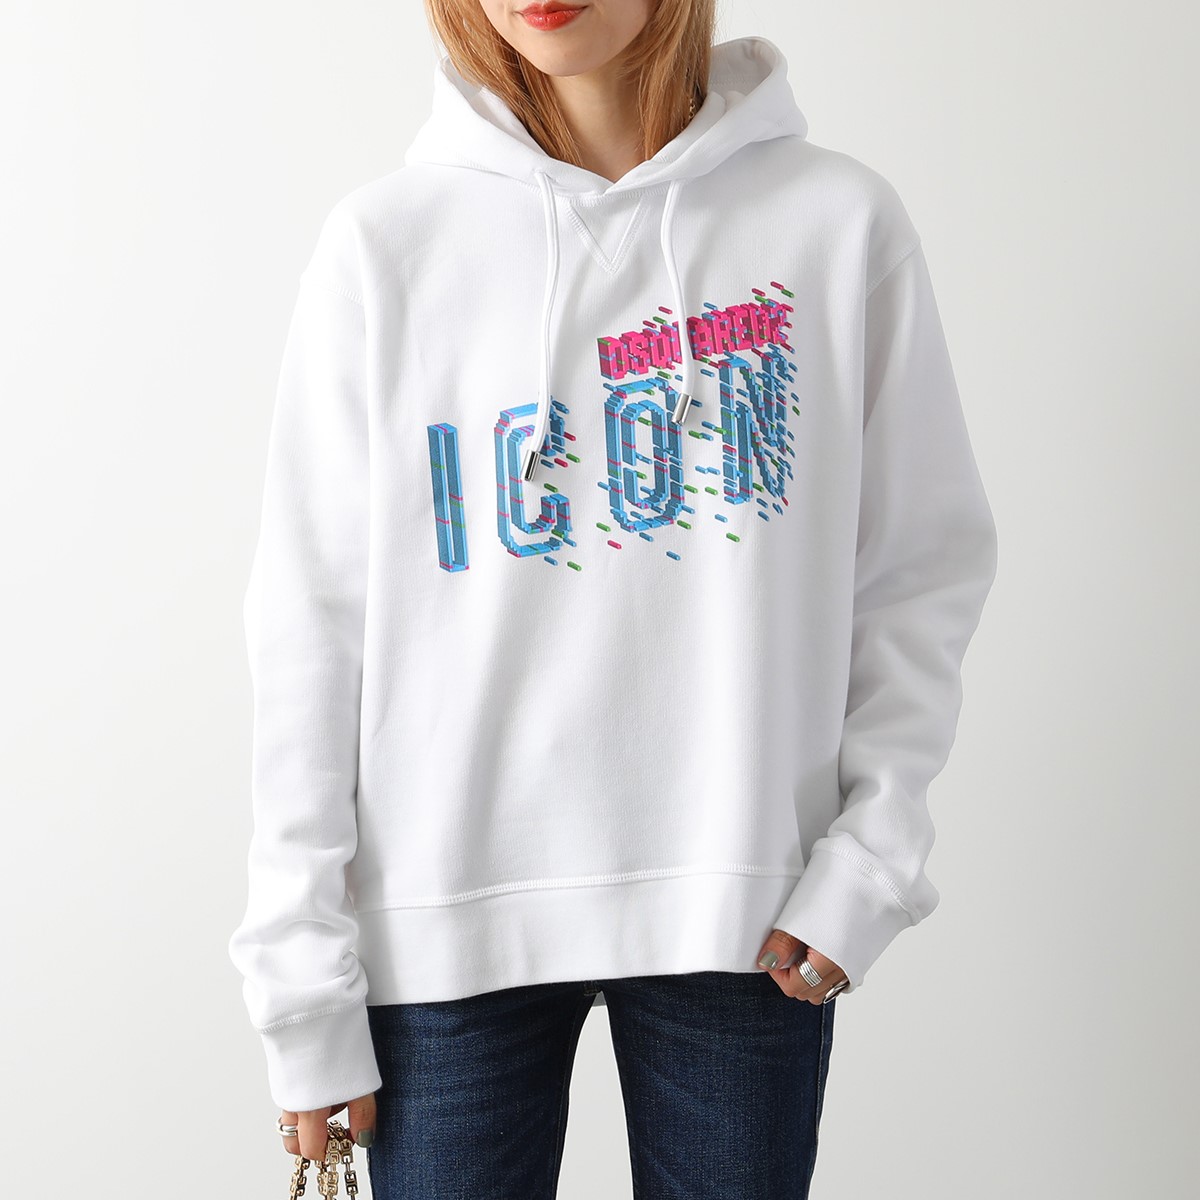 DSQUARED2 ディースクエアード パーカー ICON PIXELED COOL HOODIE S80GU0093 S25516 スウェット プルオーバー アイコン ロゴ カラー2色｜s-musee｜02